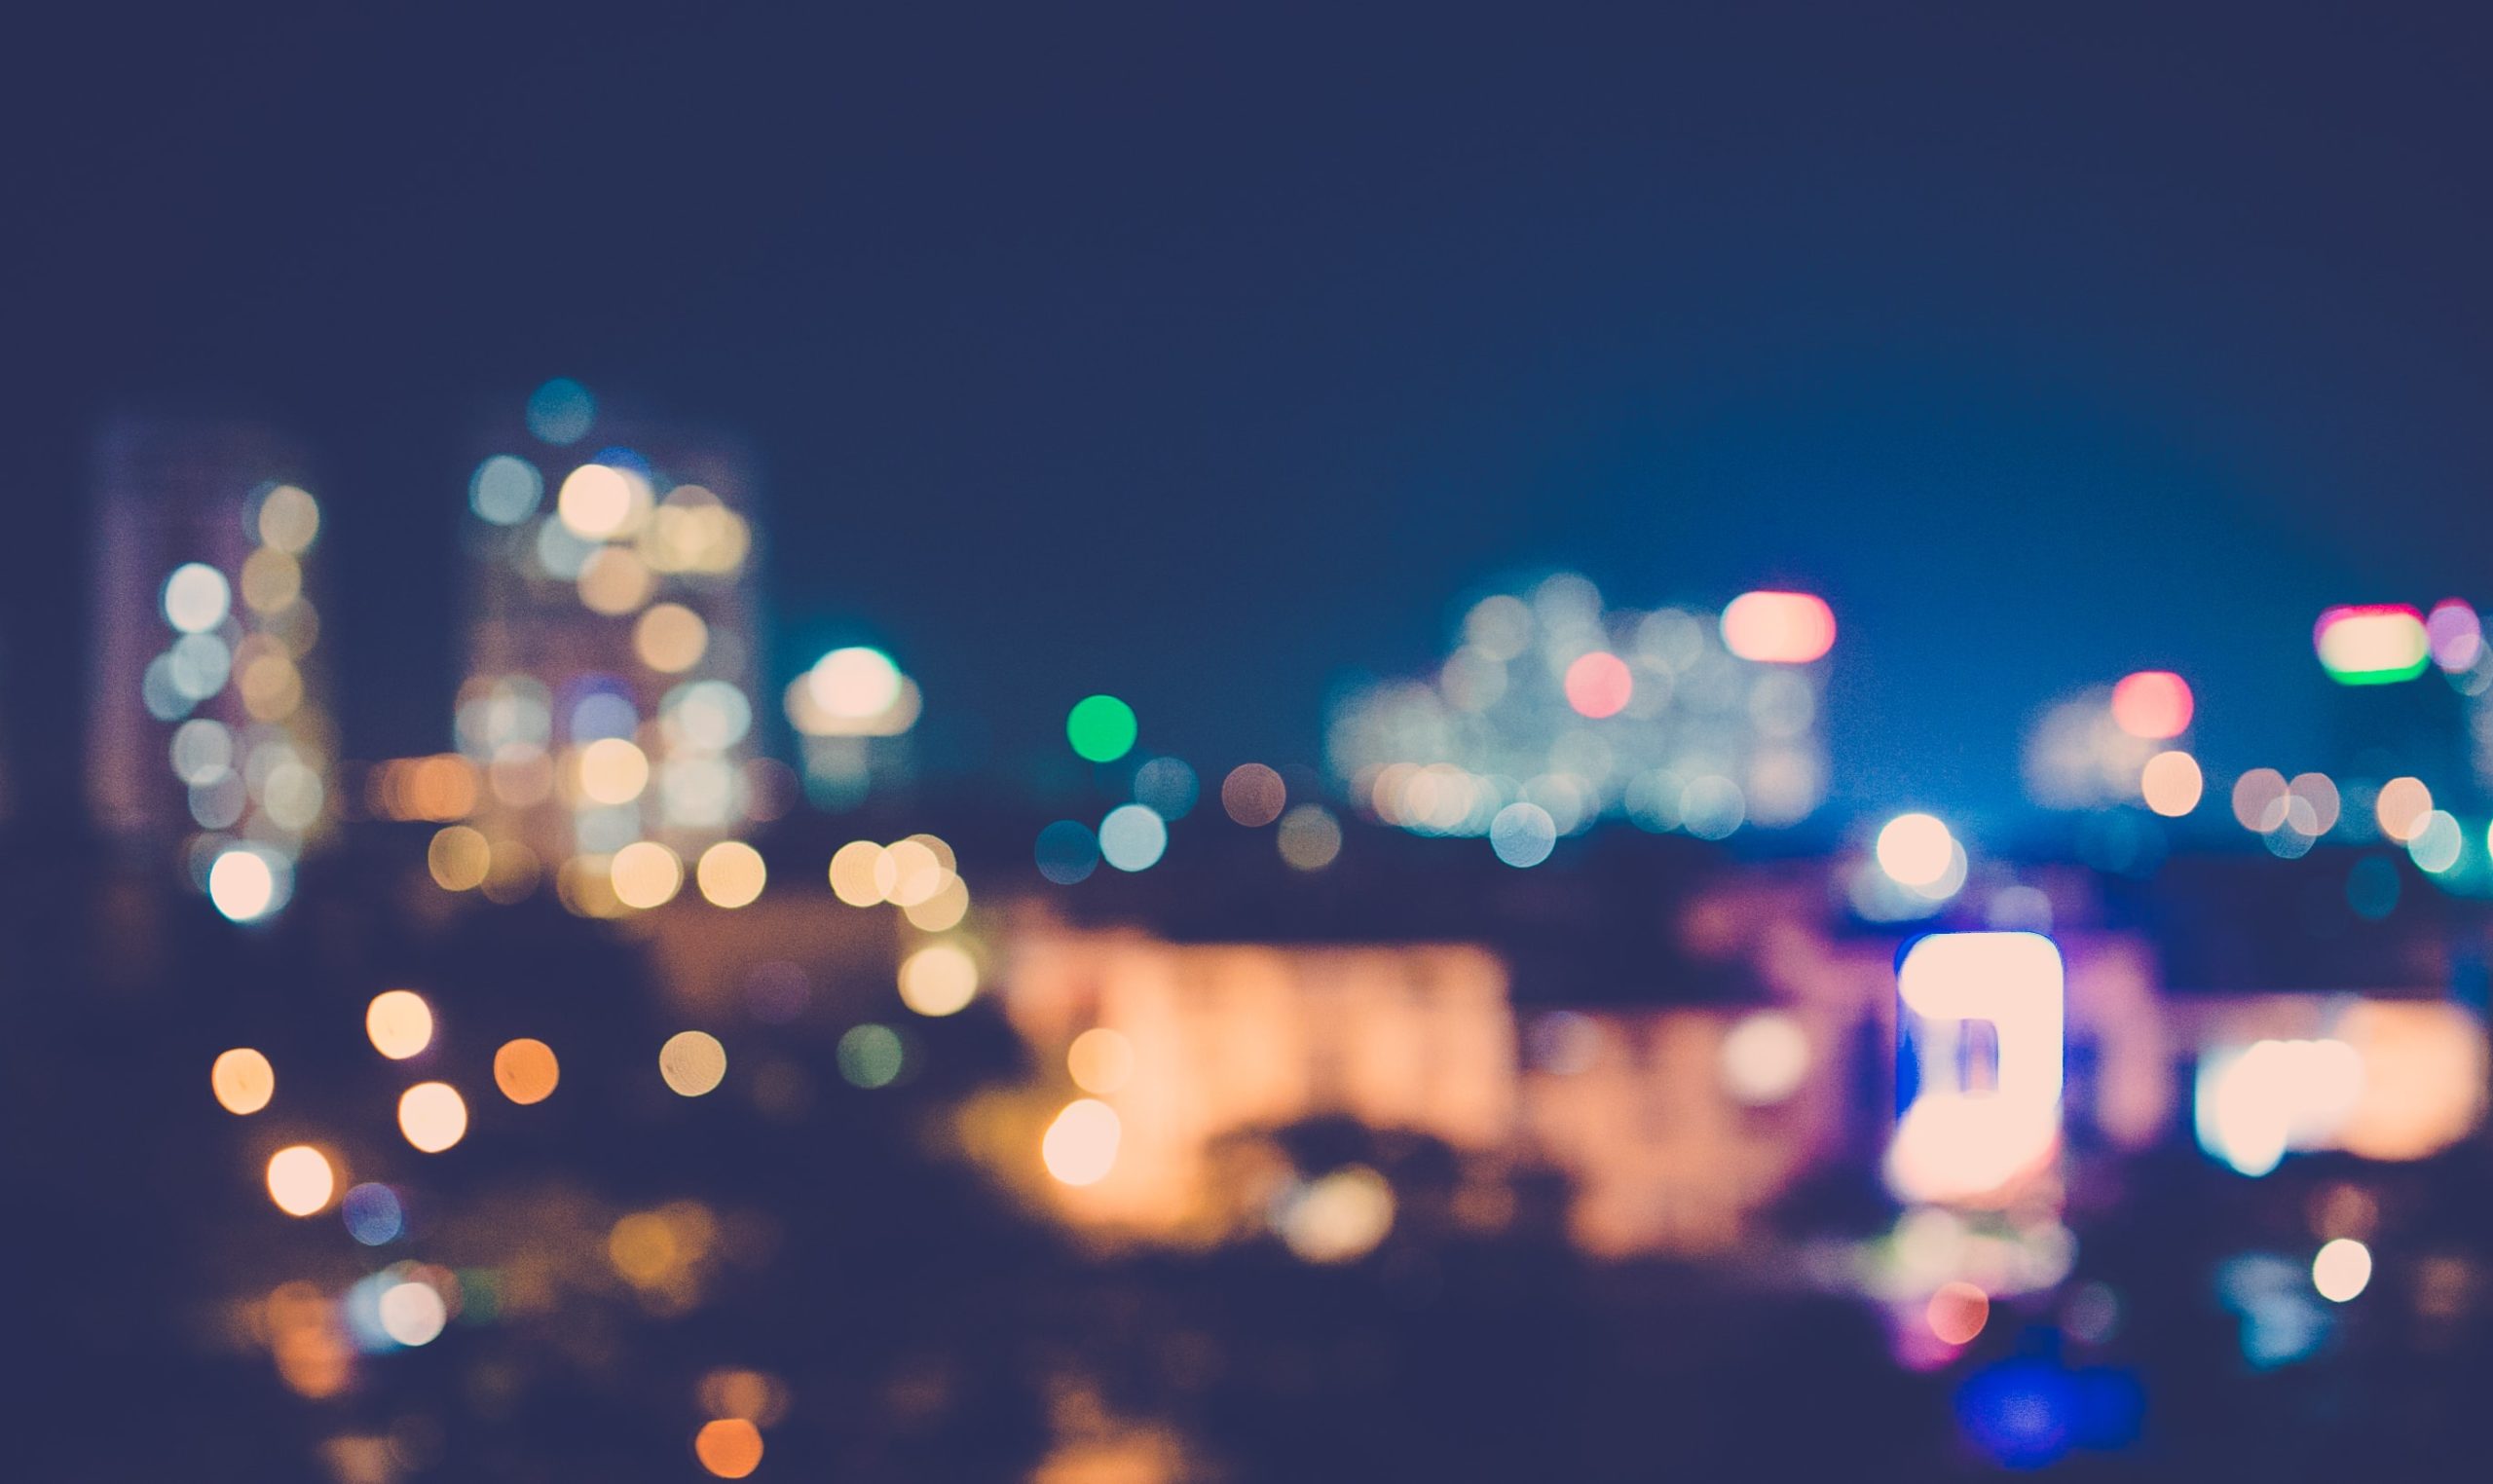 A blurred view of a city skyline at night.